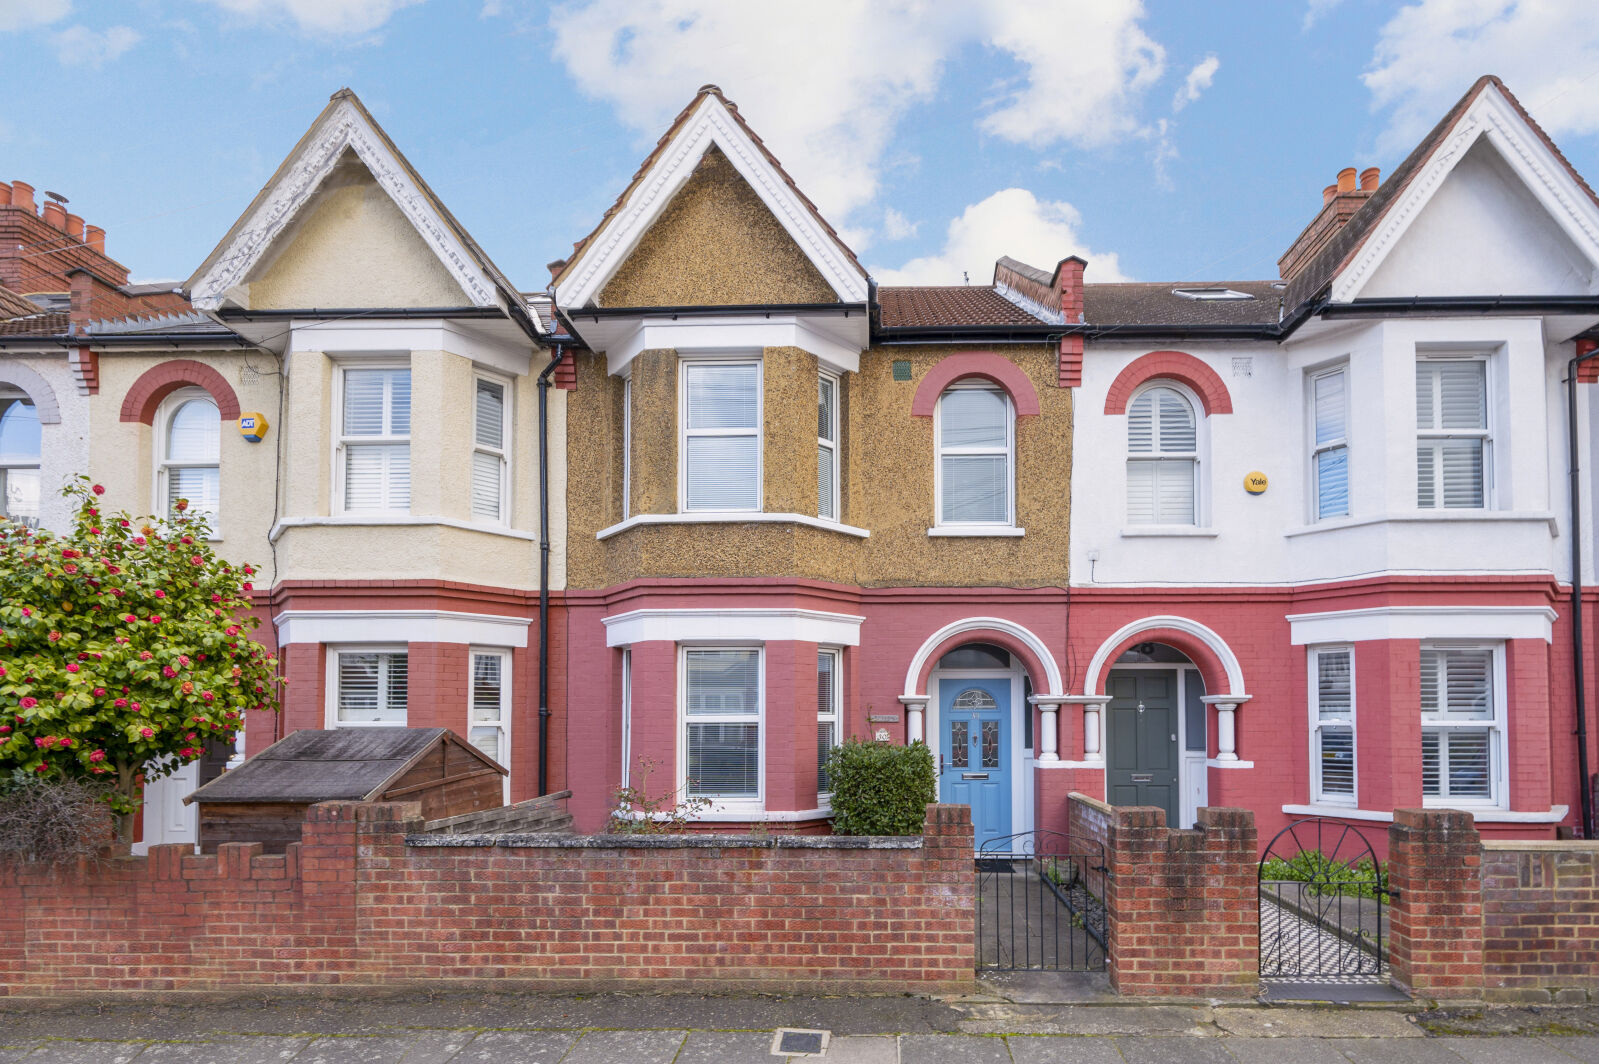 3 bedroom mid terraced house for sale Sandringham Avenue, Wimbledon Chase, SW20, main image